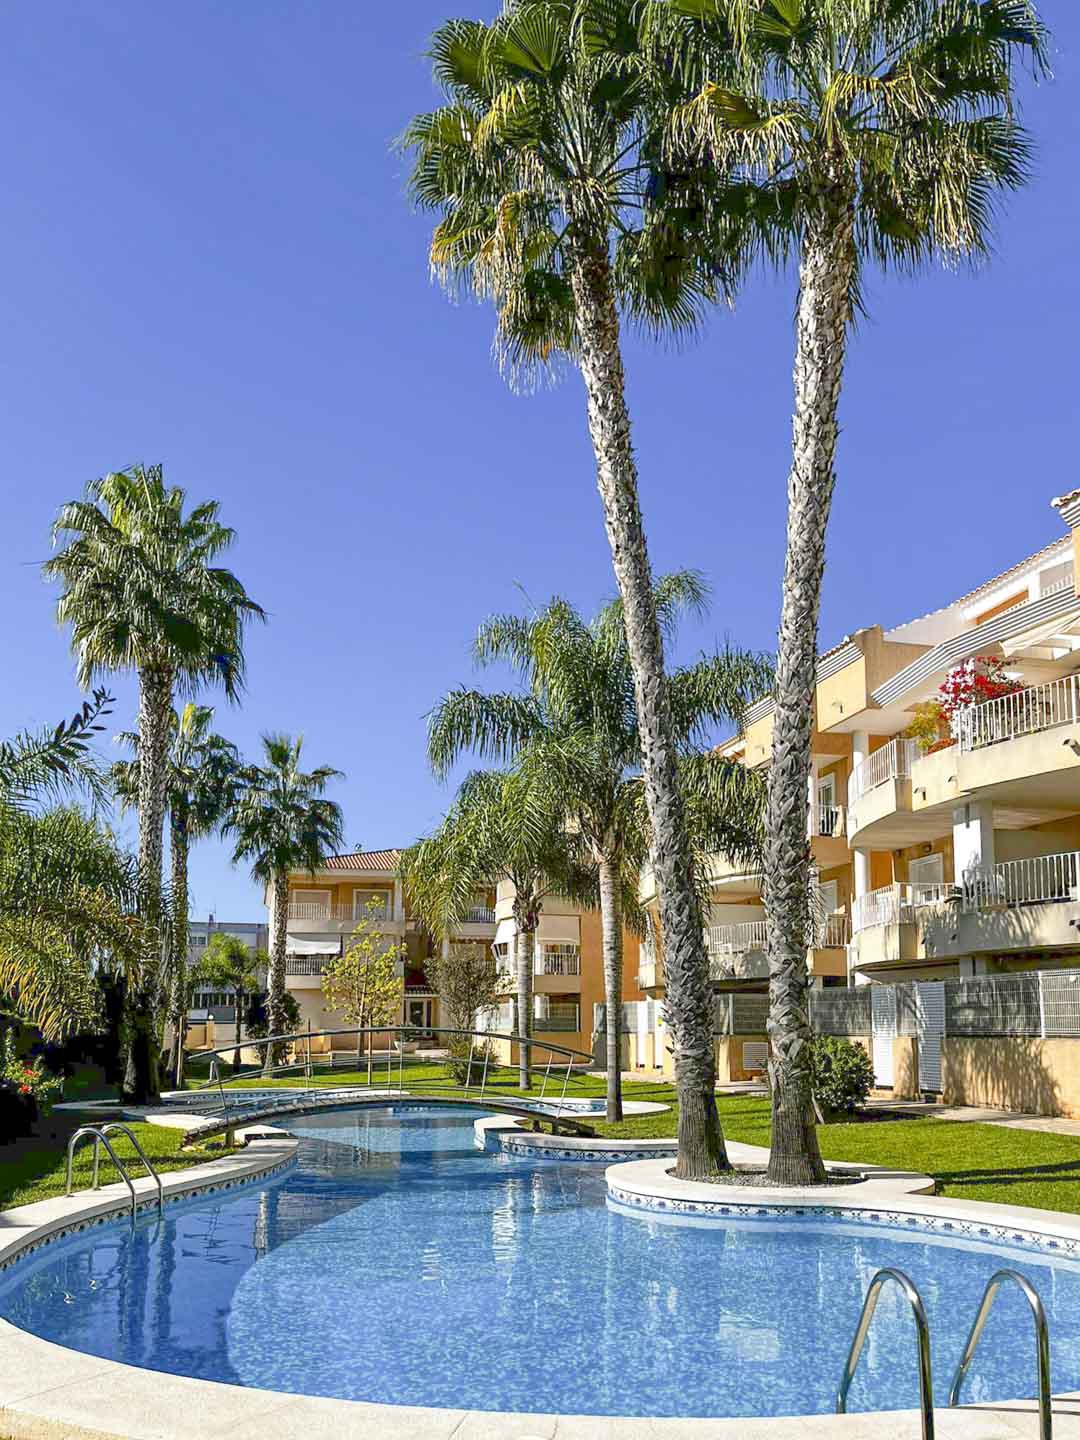 Apartment for sale in Jávea in the first Montañar